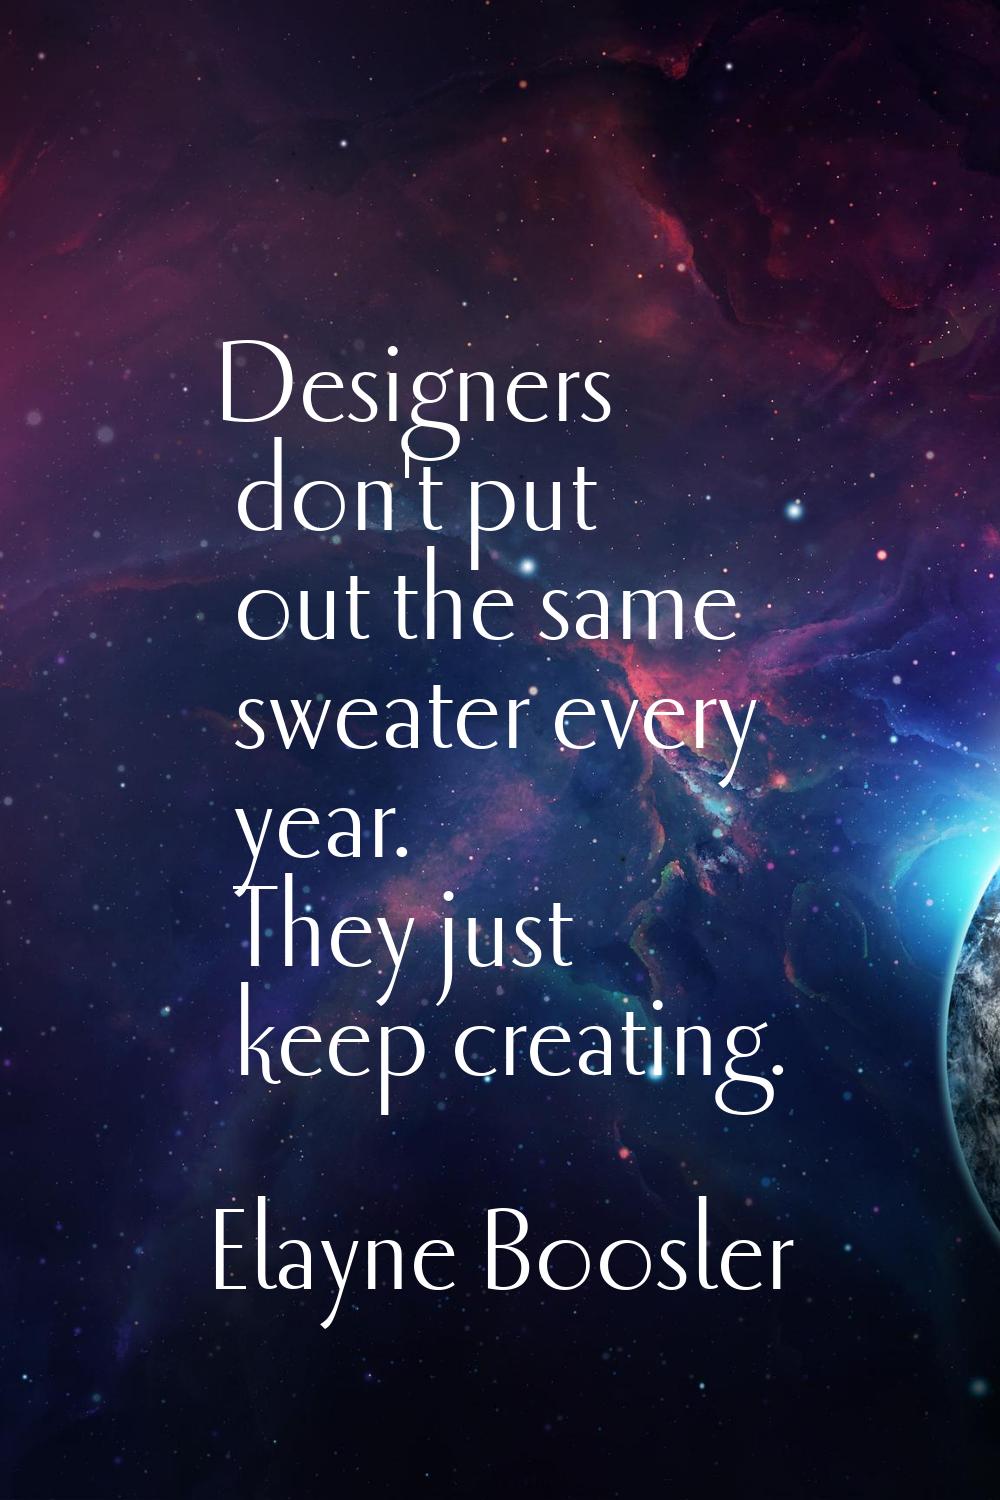 Designers don't put out the same sweater every year. They just keep creating.